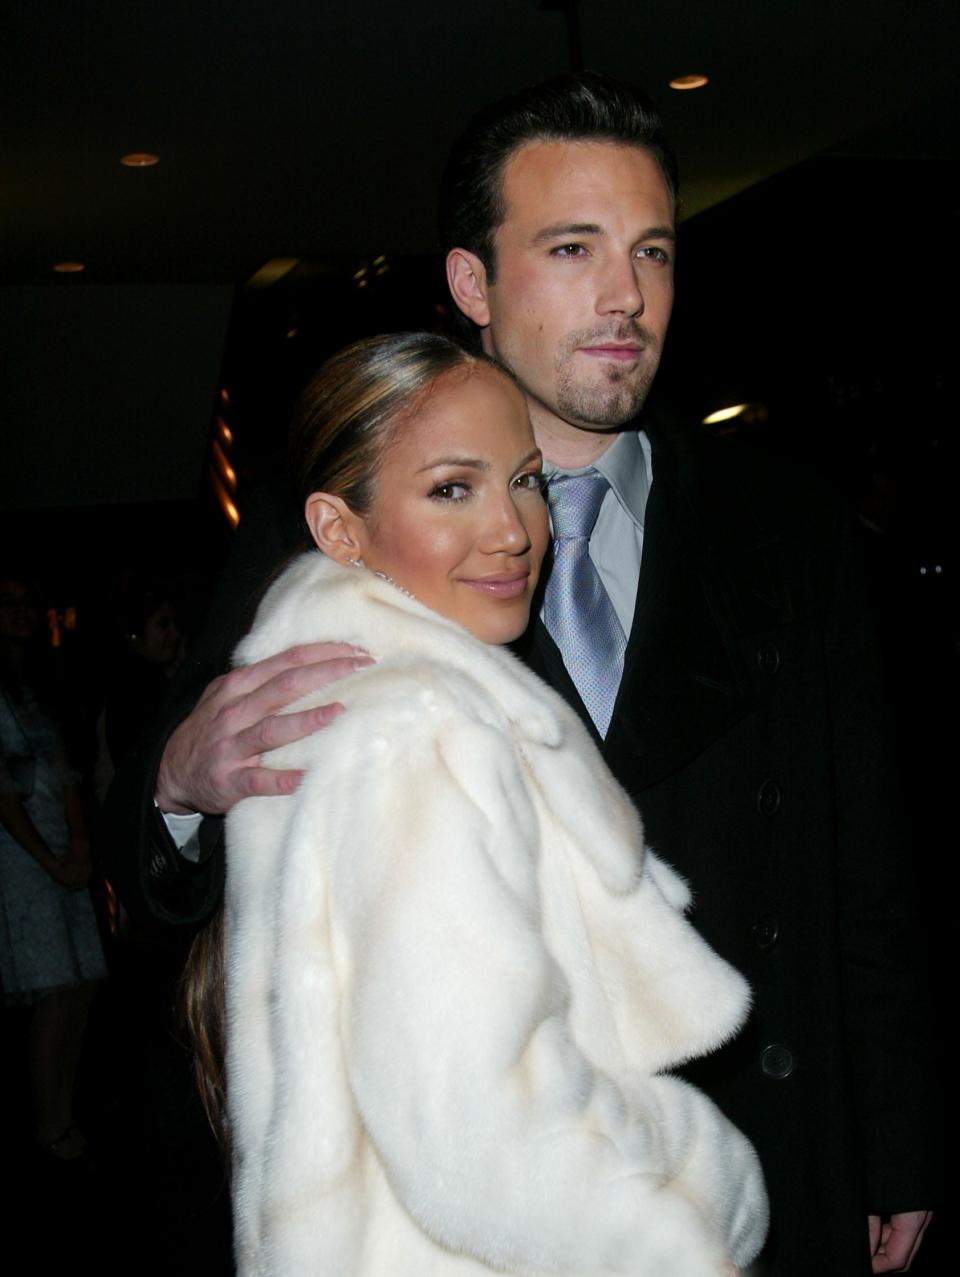 Jennifer Lopez and Ben Affleck at the 2002 premiere of "Maid in Manhattan."